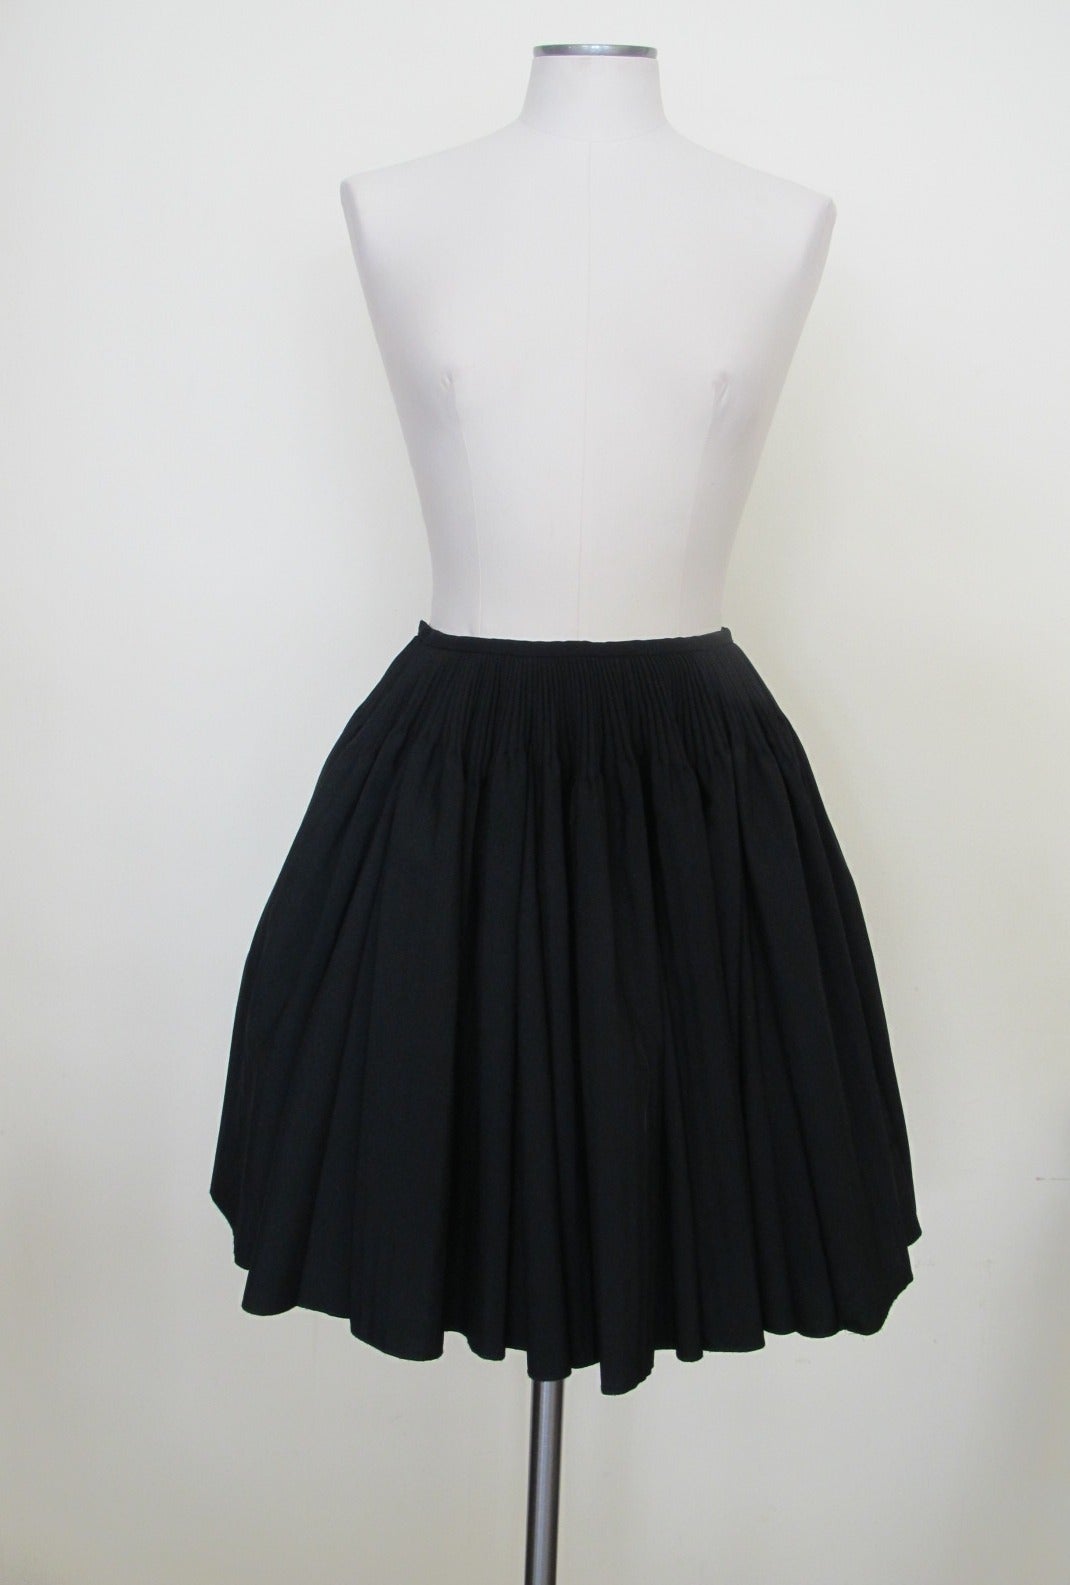 Alaia Fine Black Wool Plisse Skirt with Removable Lining In Excellent Condition For Sale In San Francisco, CA